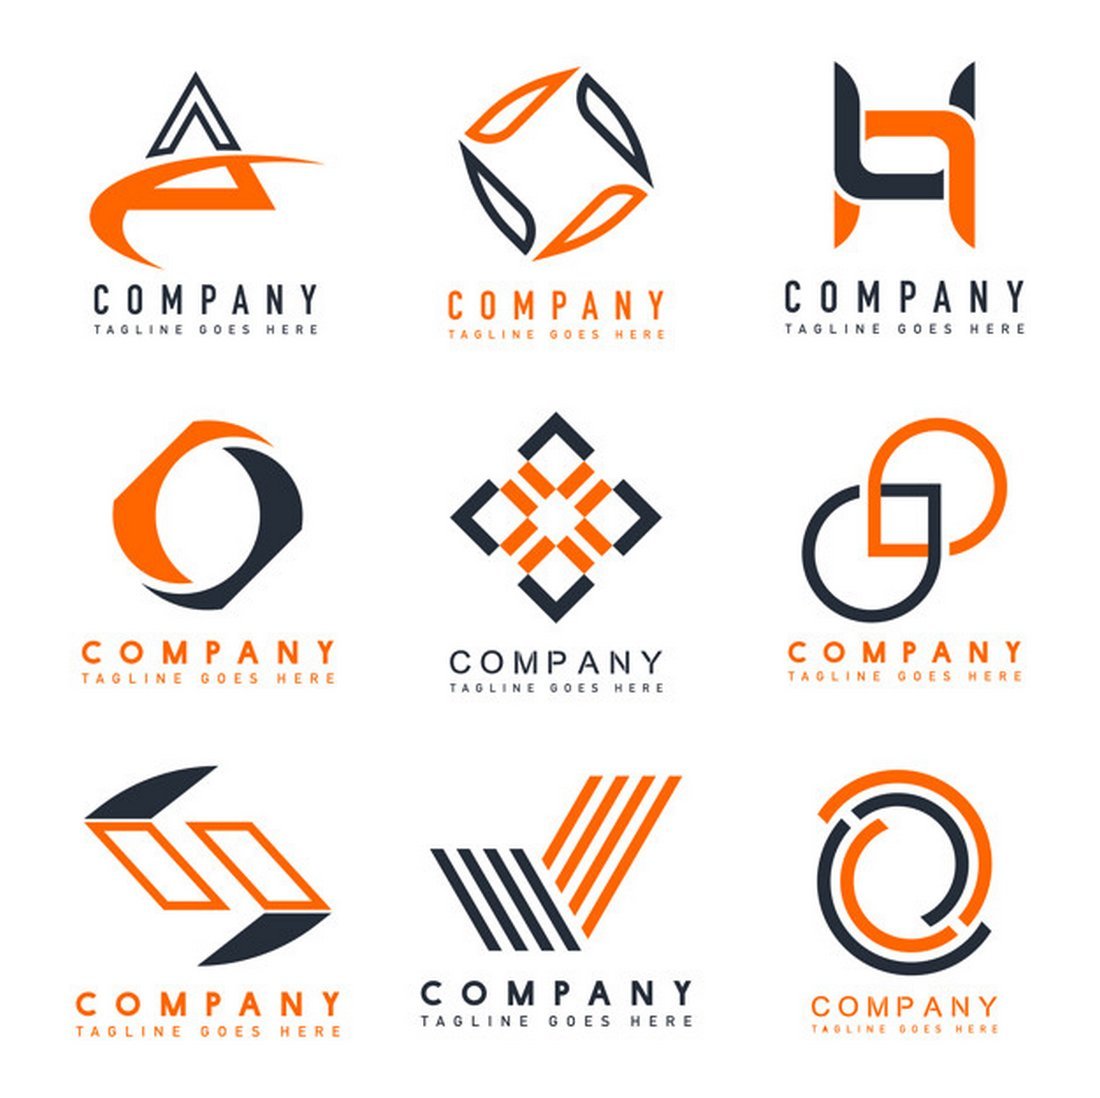 Free-Corporate-Business-Logo-Templates 30+ Best Free Logo Makers + Design Templates 2021 design tips